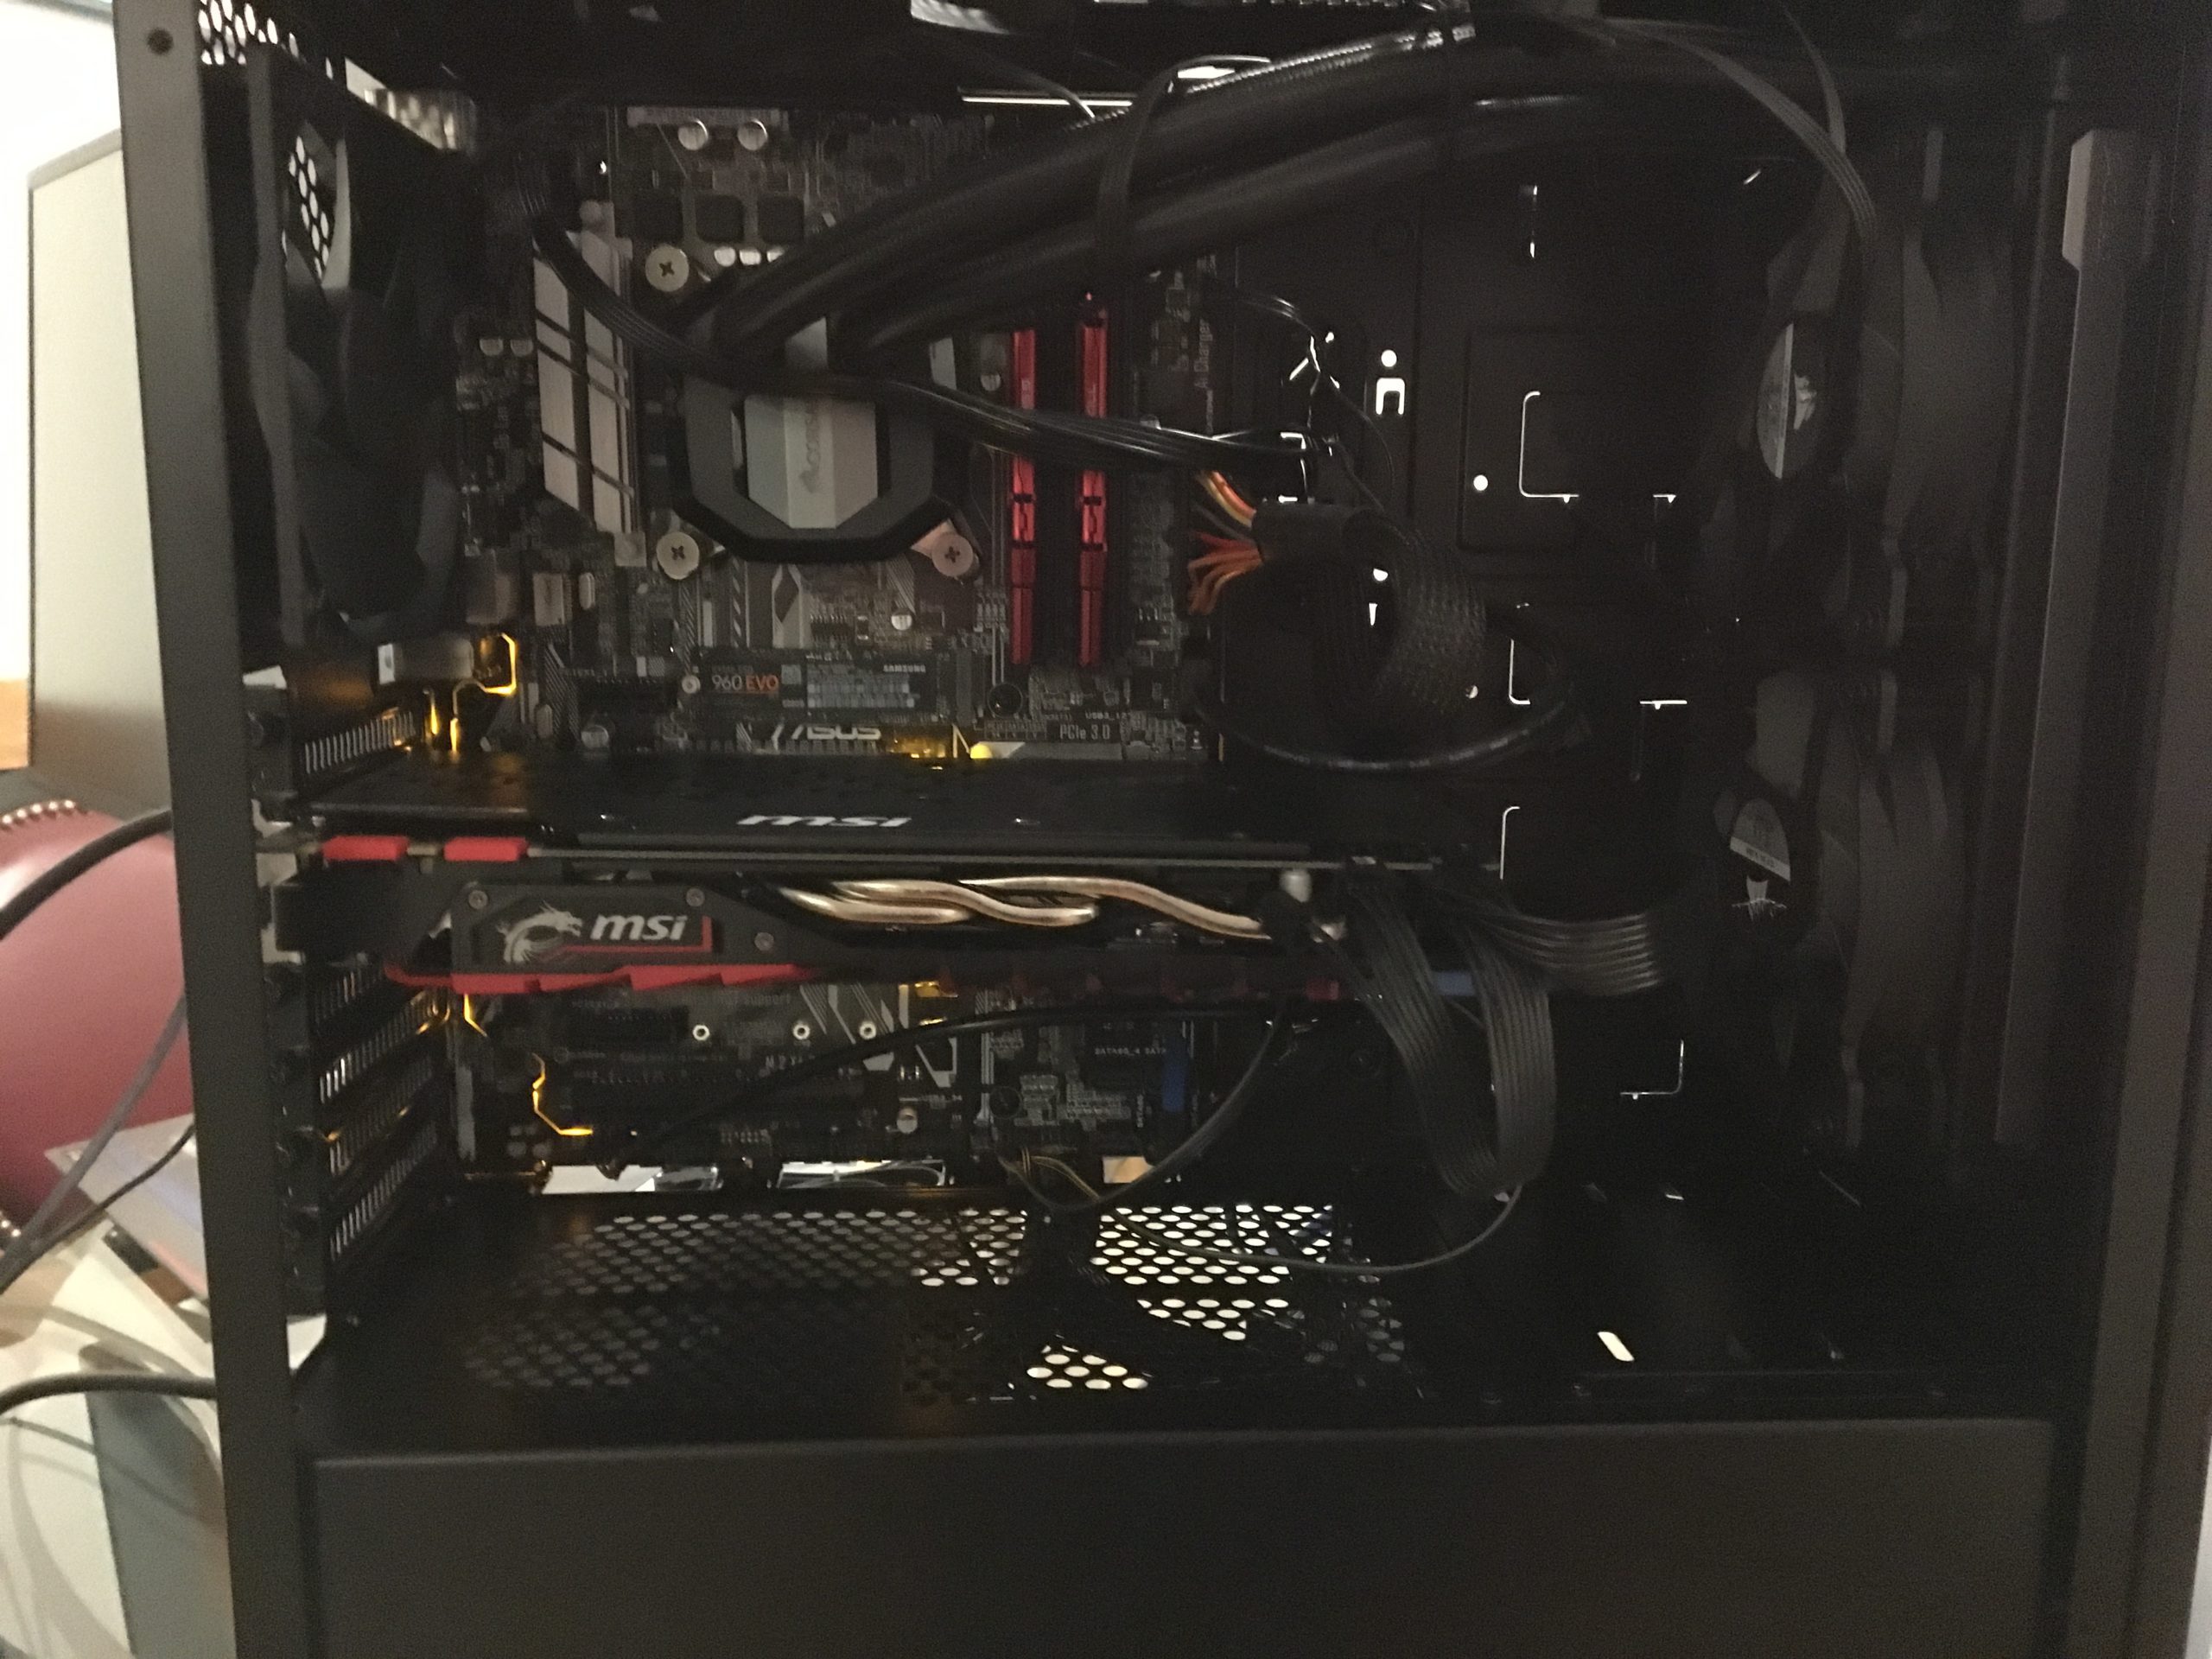 My PC Building Adventure, Part Two: Something Went Horribly Wrong